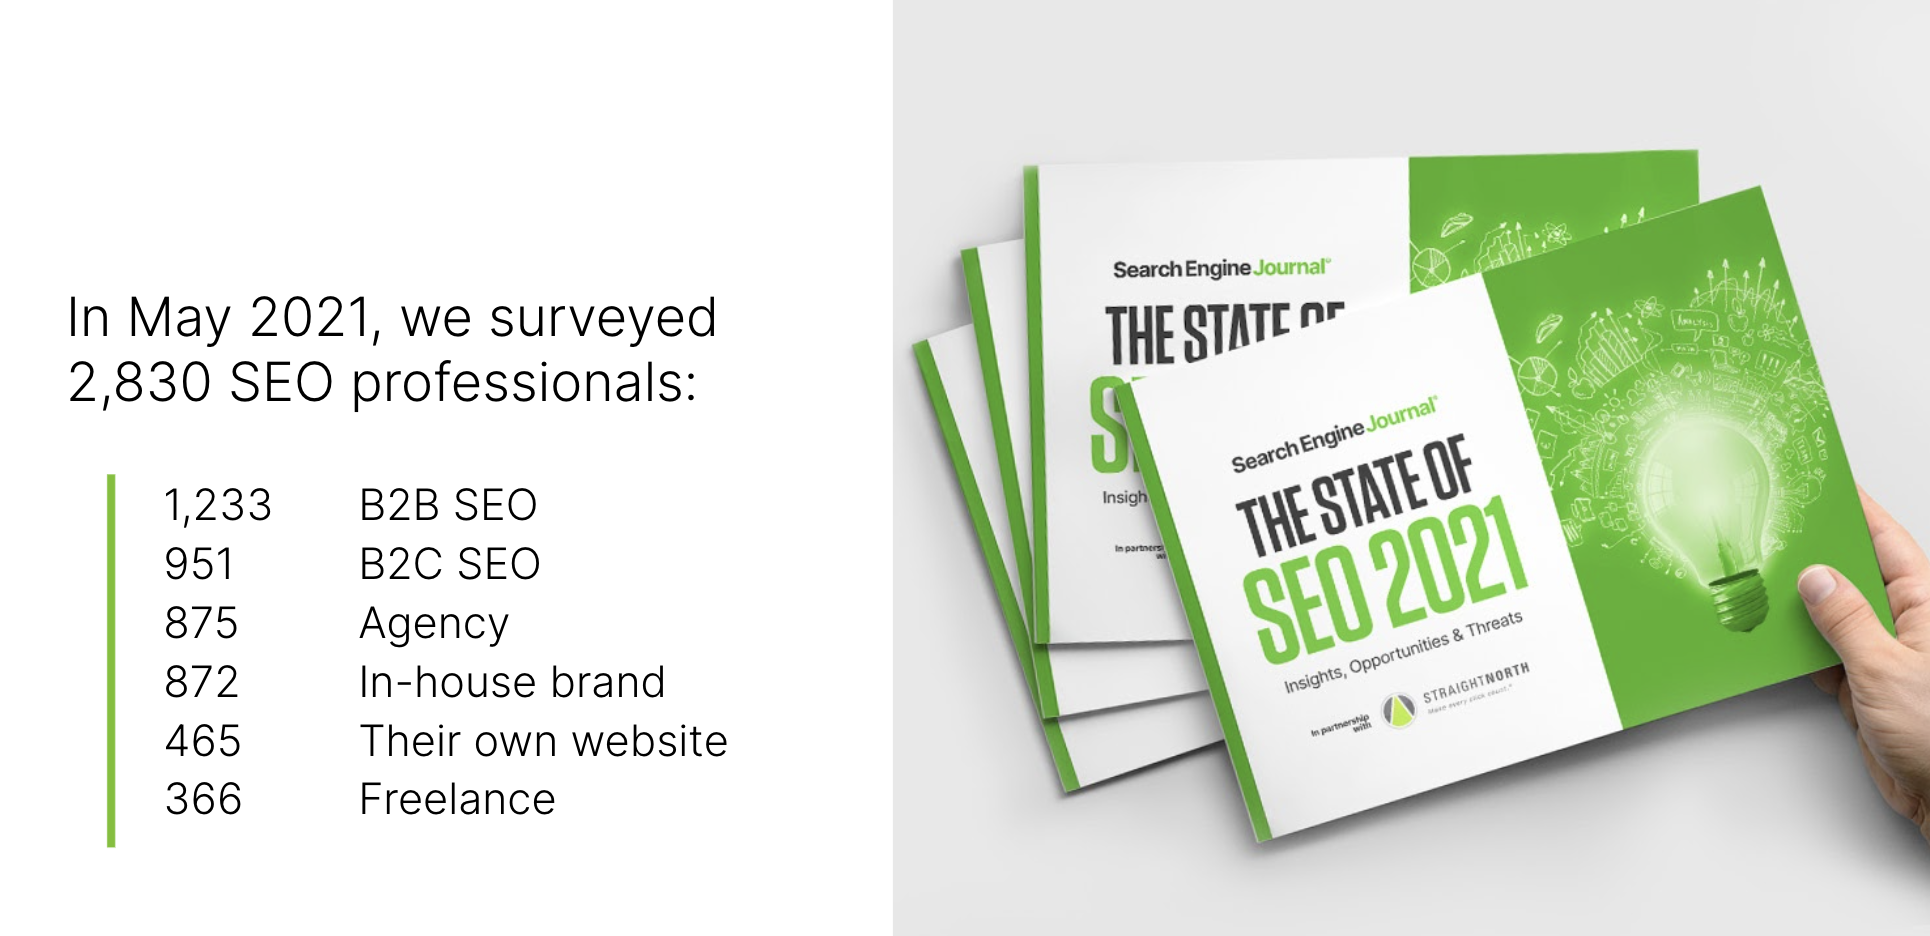 State of SEO: The Top Opportunities & Risks for the Next 12 Months